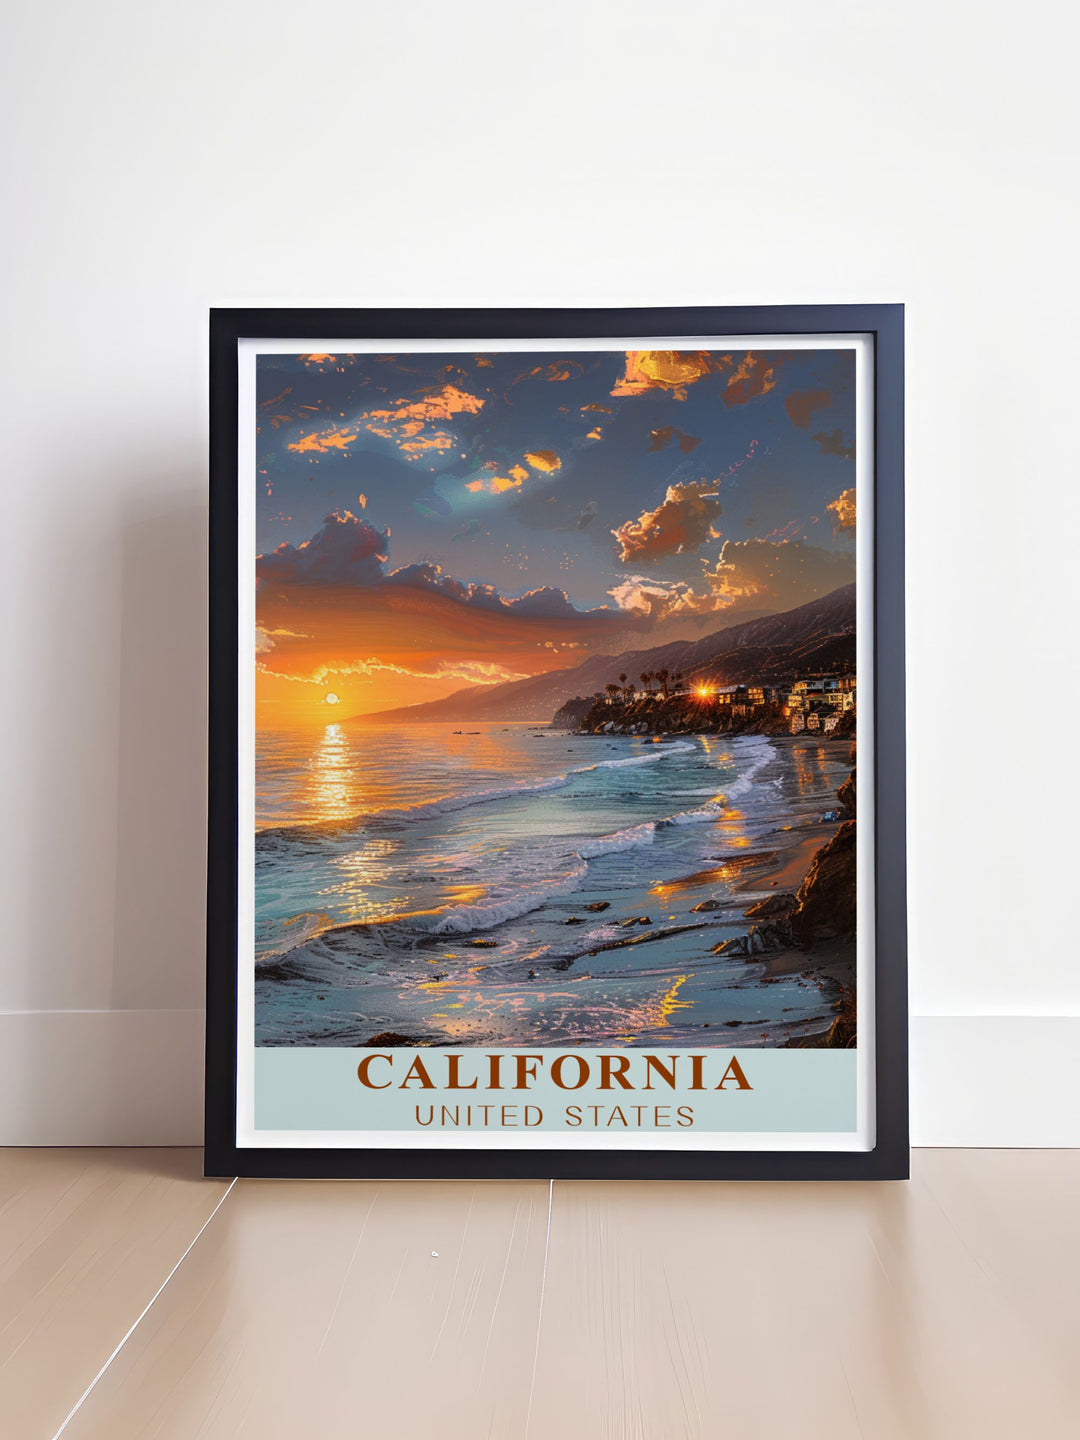 Stunning Malibu poster ideal for home decor and beach lovers showcases the tranquil shores and scenic views of Californias famous coastal destination a perfect addition to any art collection or wall display inspiring dreams of coastal living